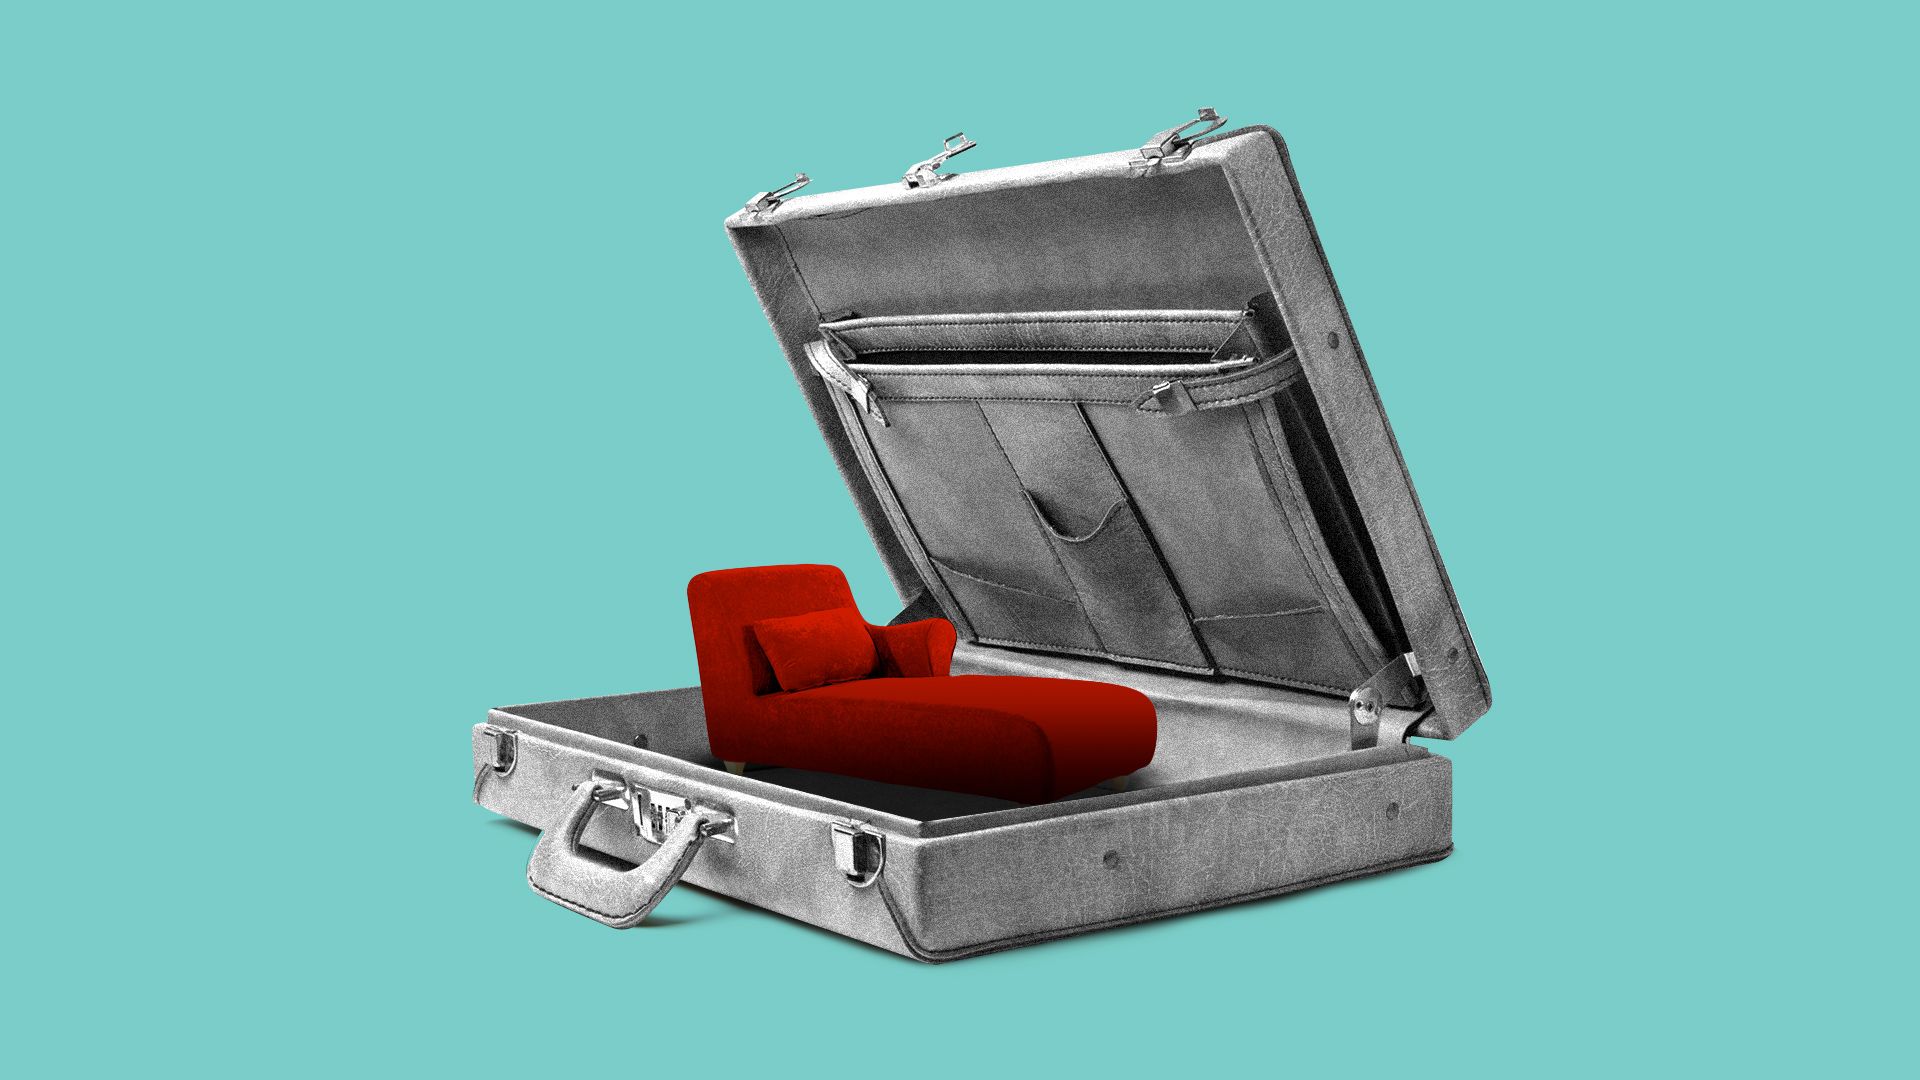 Illustration of a psychologist's couch in an open suitcase.